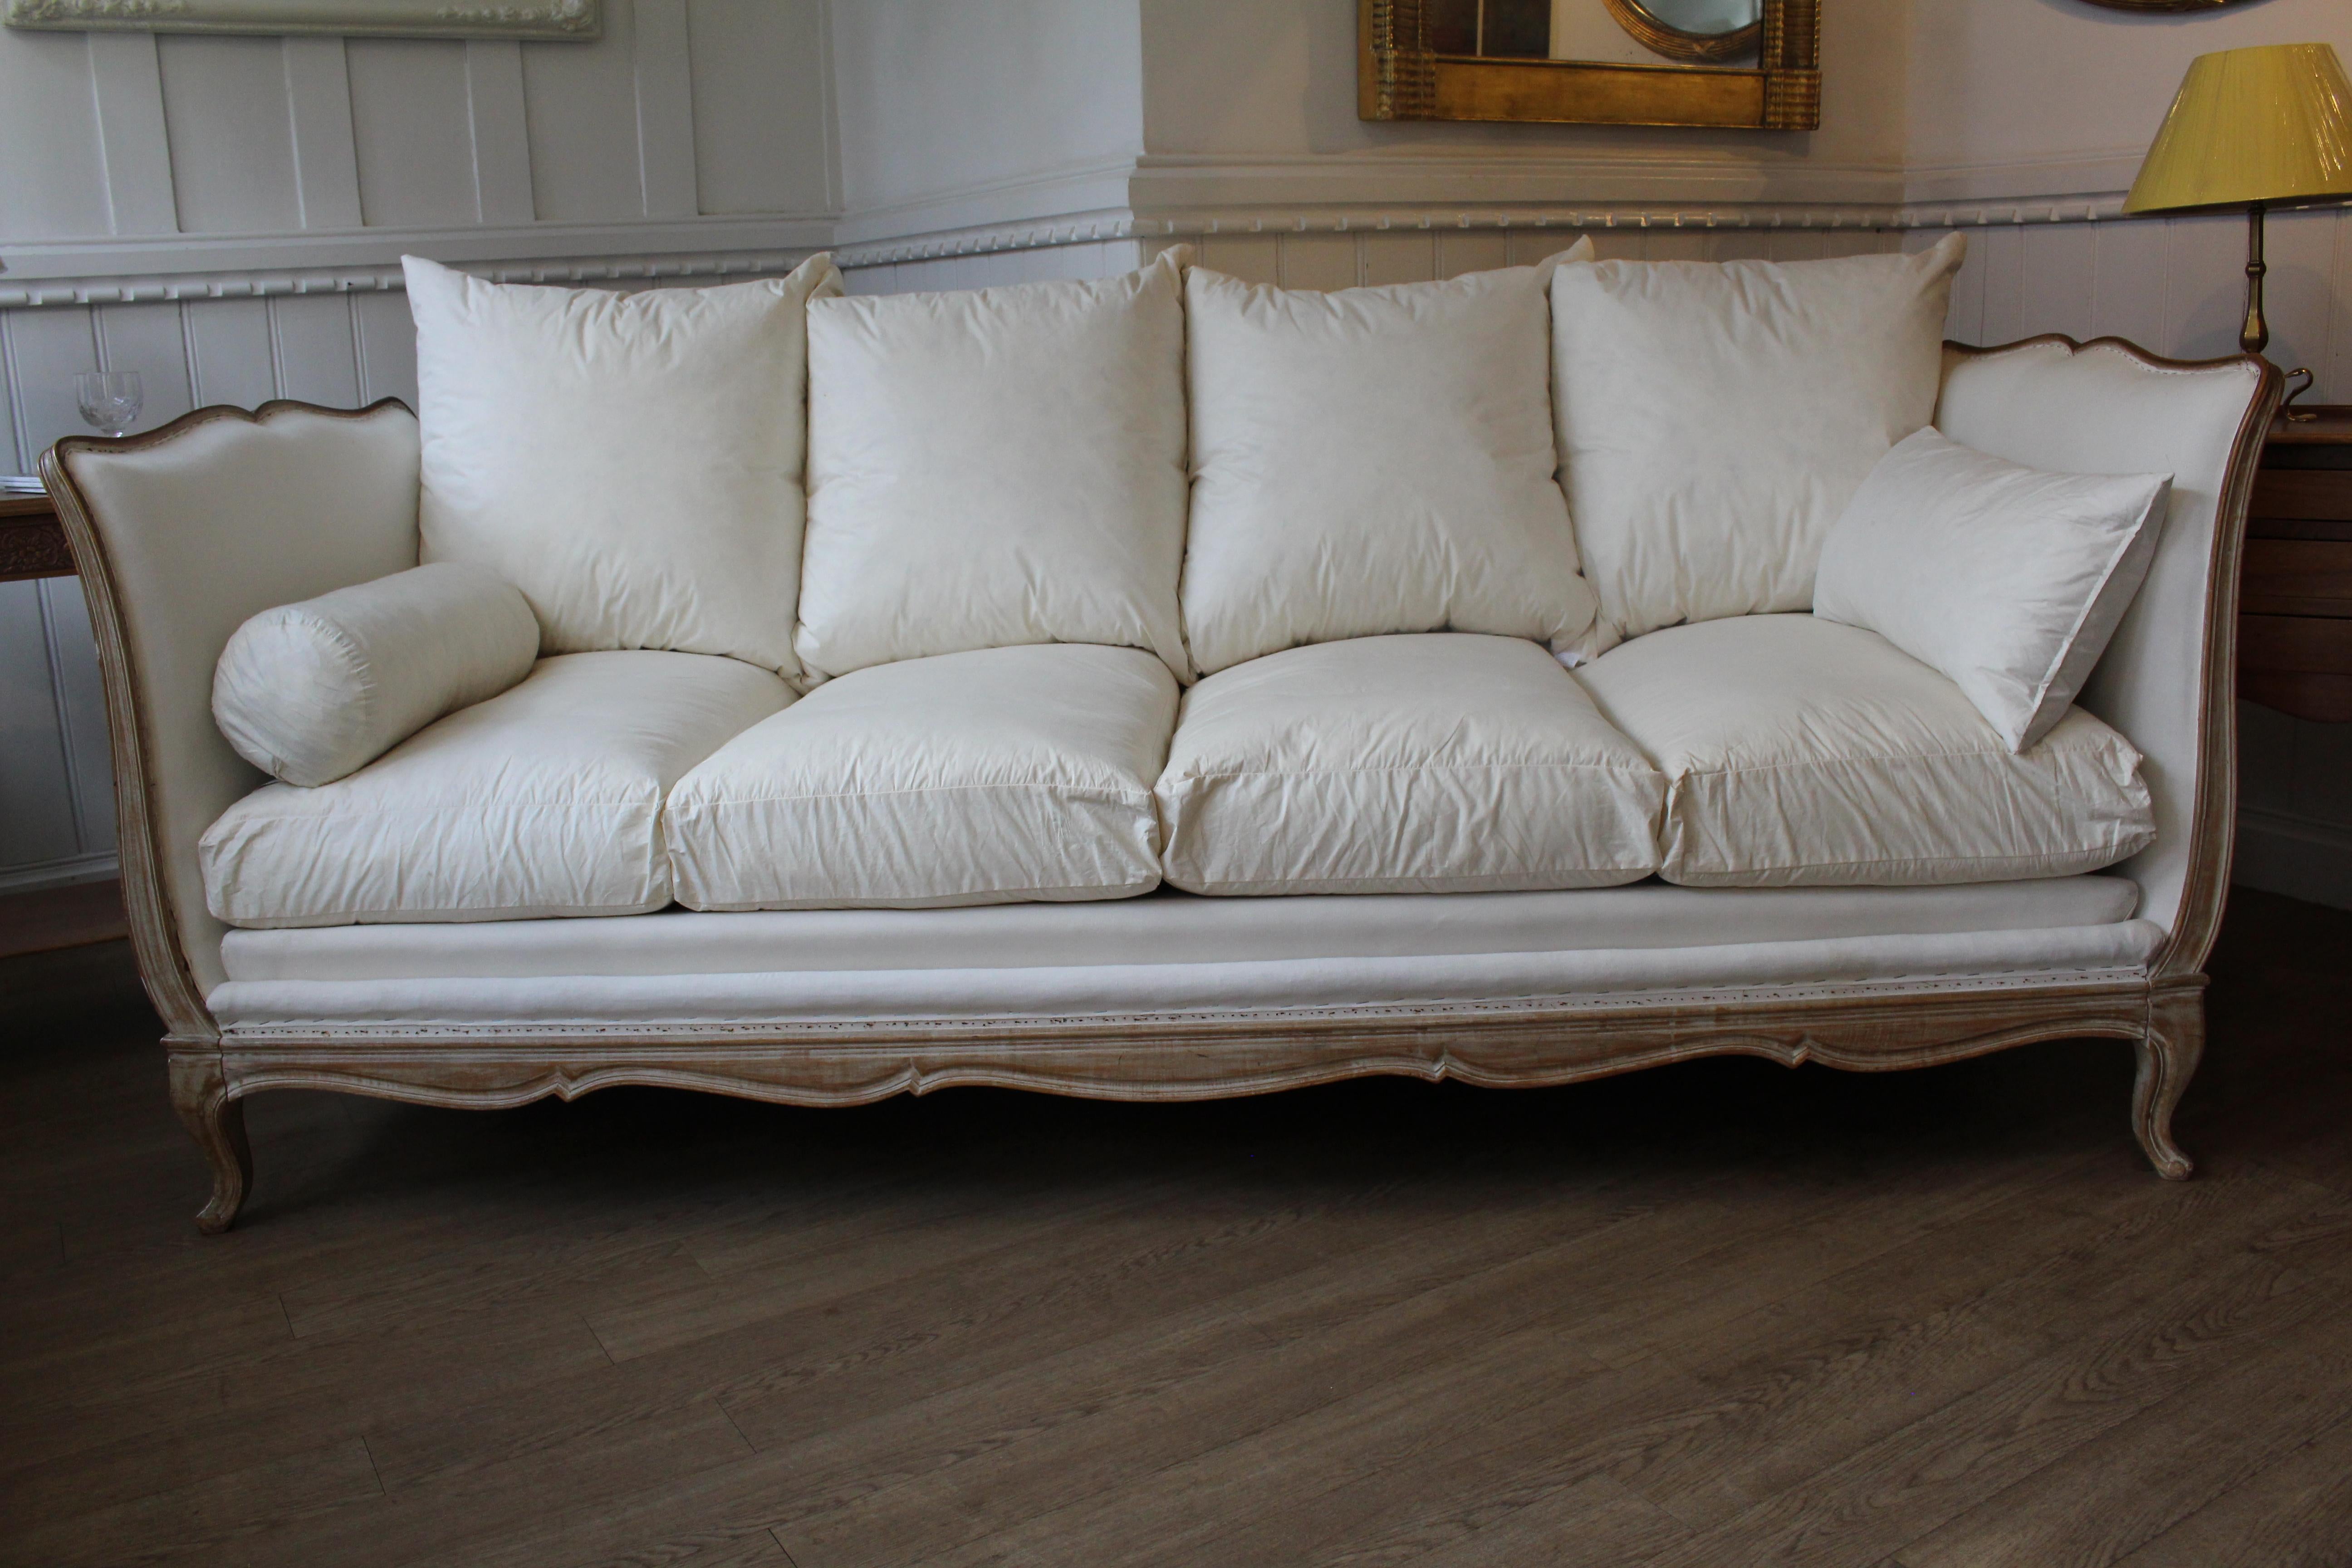 Serpentine Wooden 20th Century Daybed Sofa Centre Bench Bed Louis XV Style For Sale 2